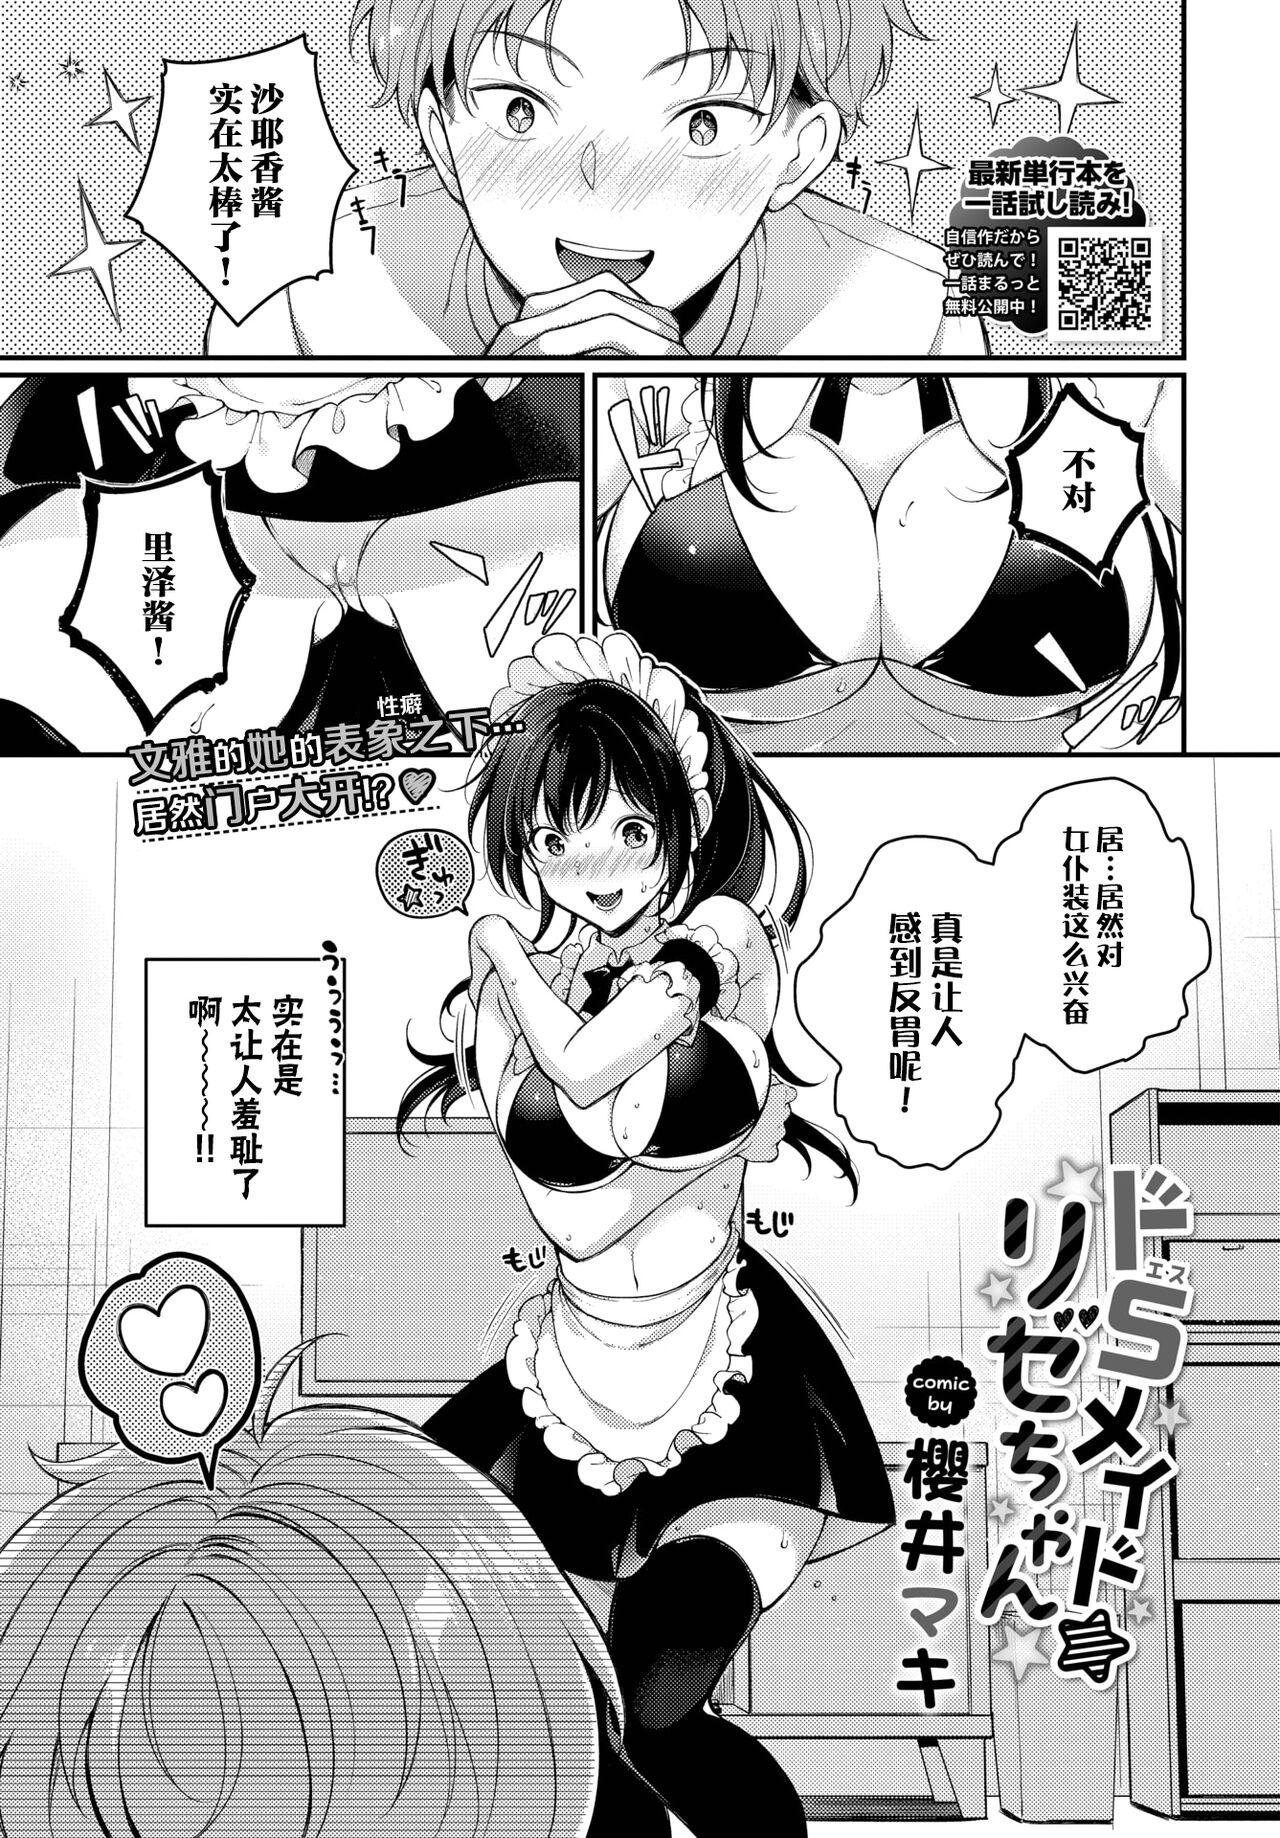 The Do-S Maid Chan 0